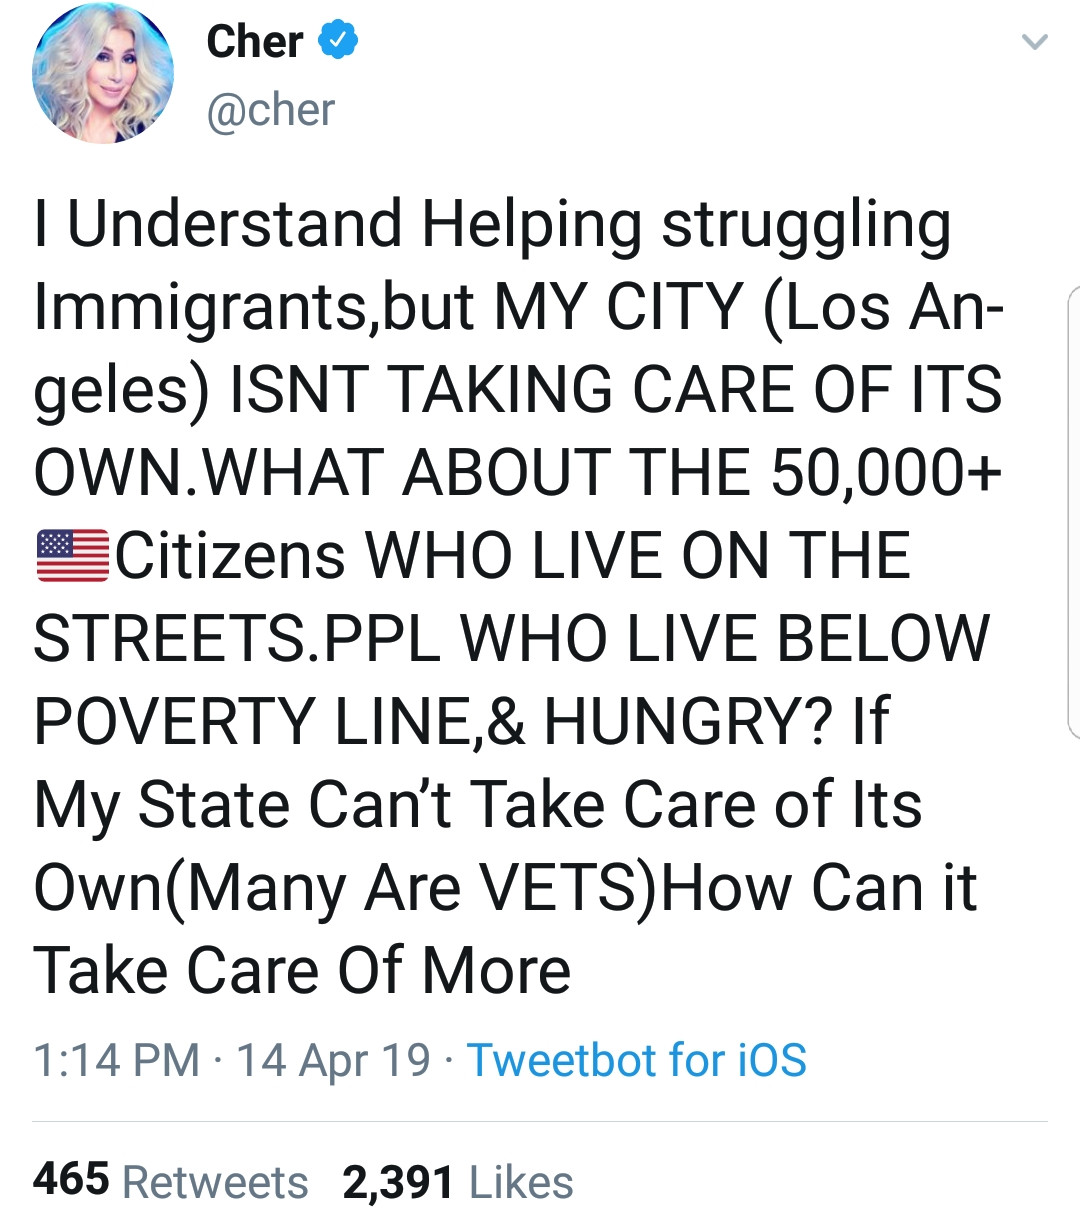 Conservative memes - point - Cher T Understand Helping struggling Immigrants,but My City Los An geles Isnt Taking Care Of Its Own.What About The 50,000 Citizens Who Live On The Streets.Ppl Who Live Below Poverty Line,& Hungry? If My State Can't Take Care 